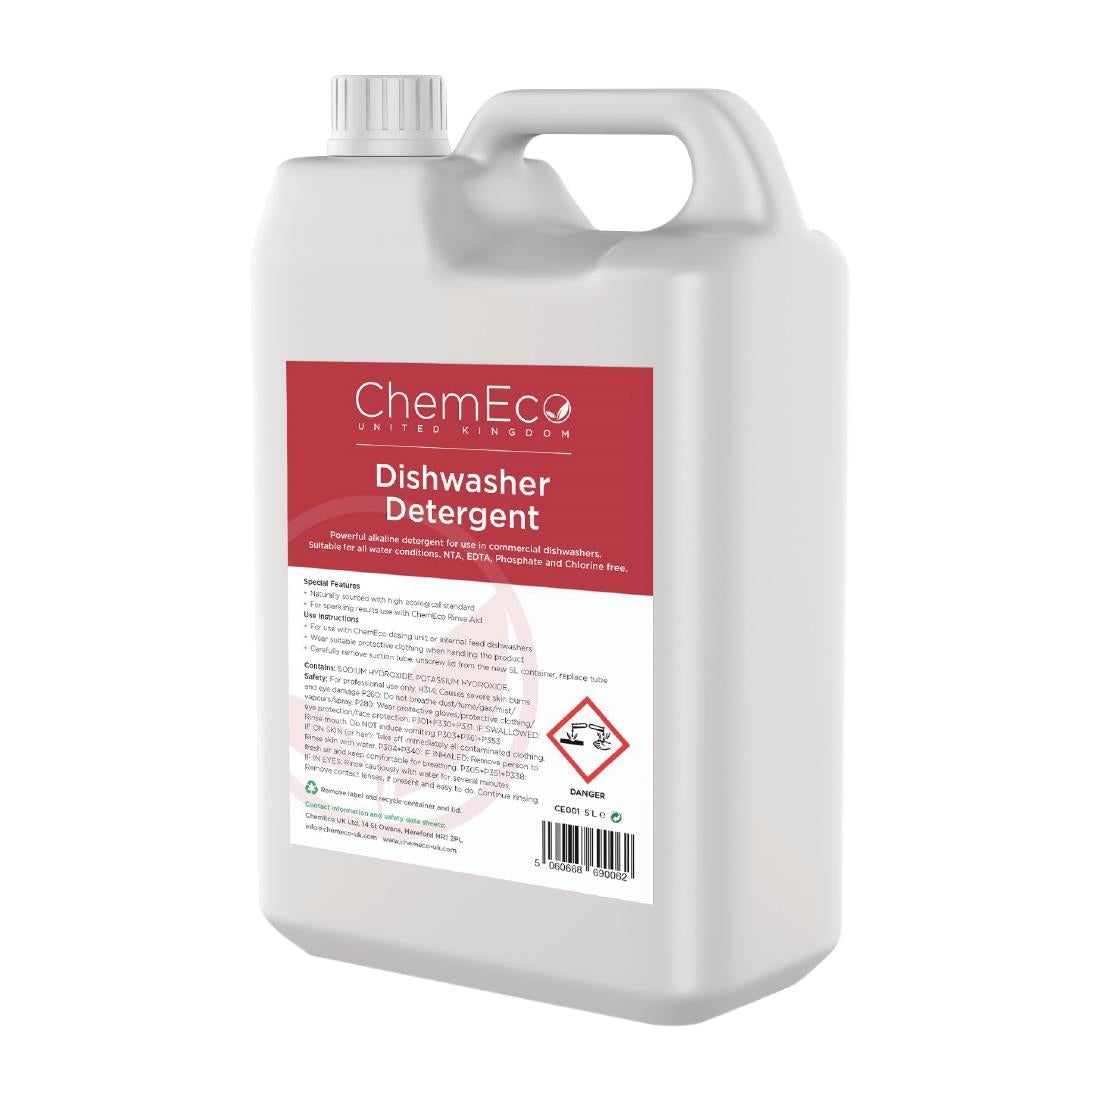 CX953 ChemEco Dishwasher Detergent 5Ltr JD Catering Equipment Solutions Ltd